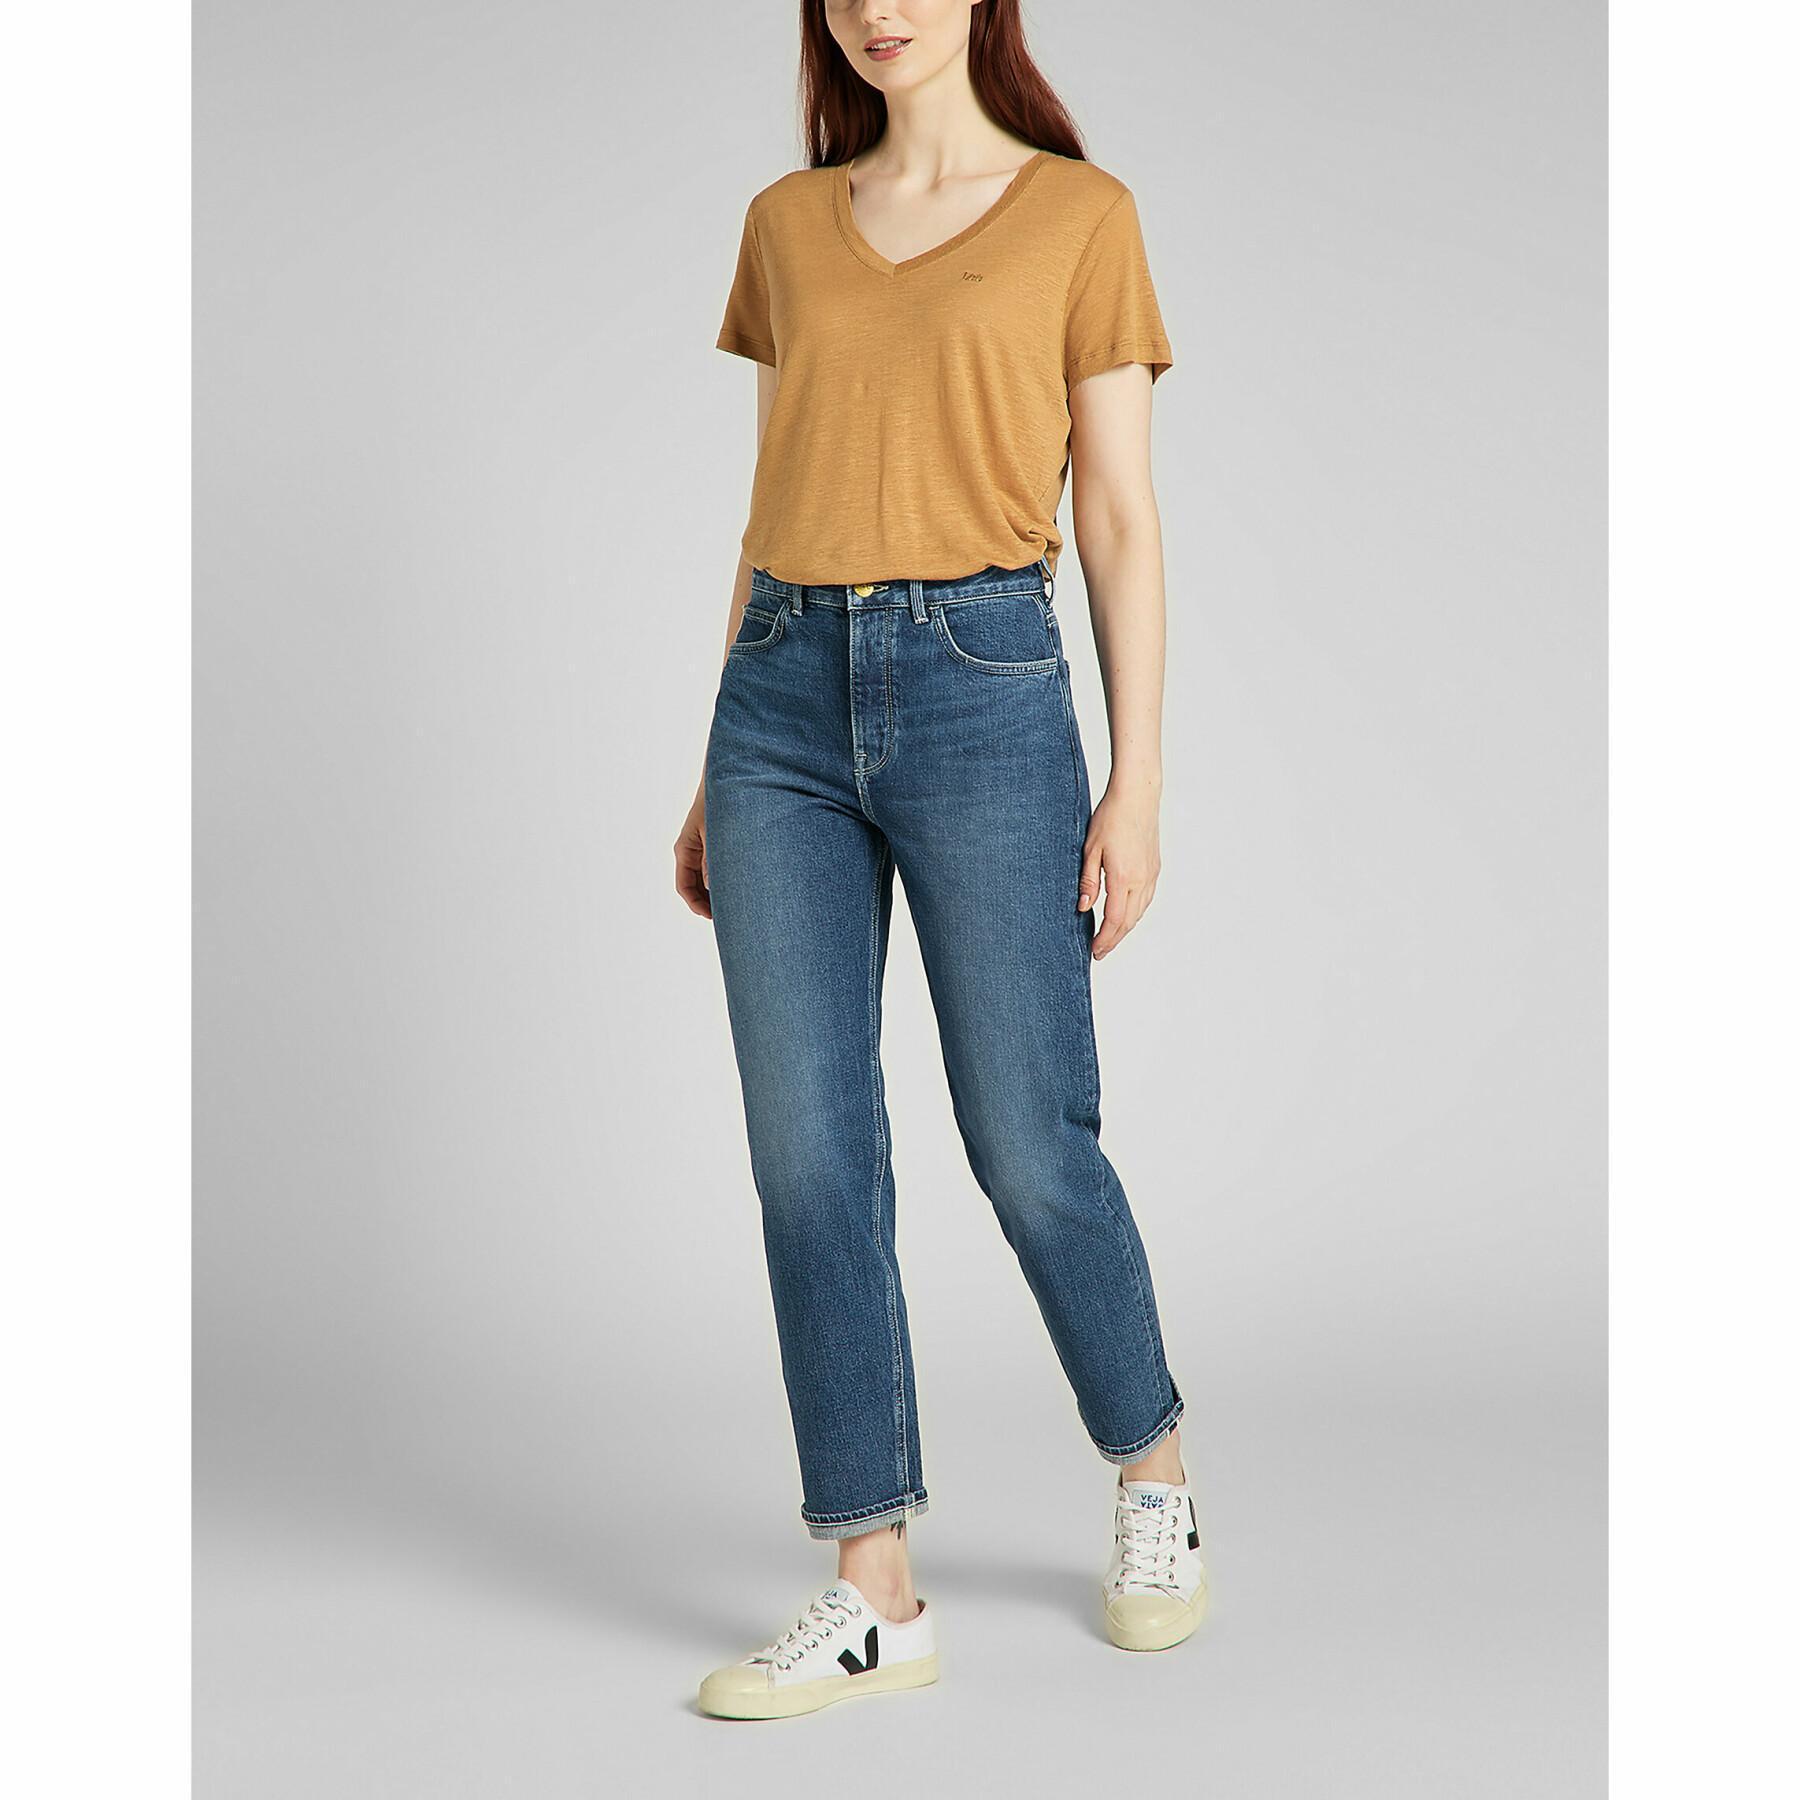 Women's jeans Lee Carol Button Fly in Mid Newberry